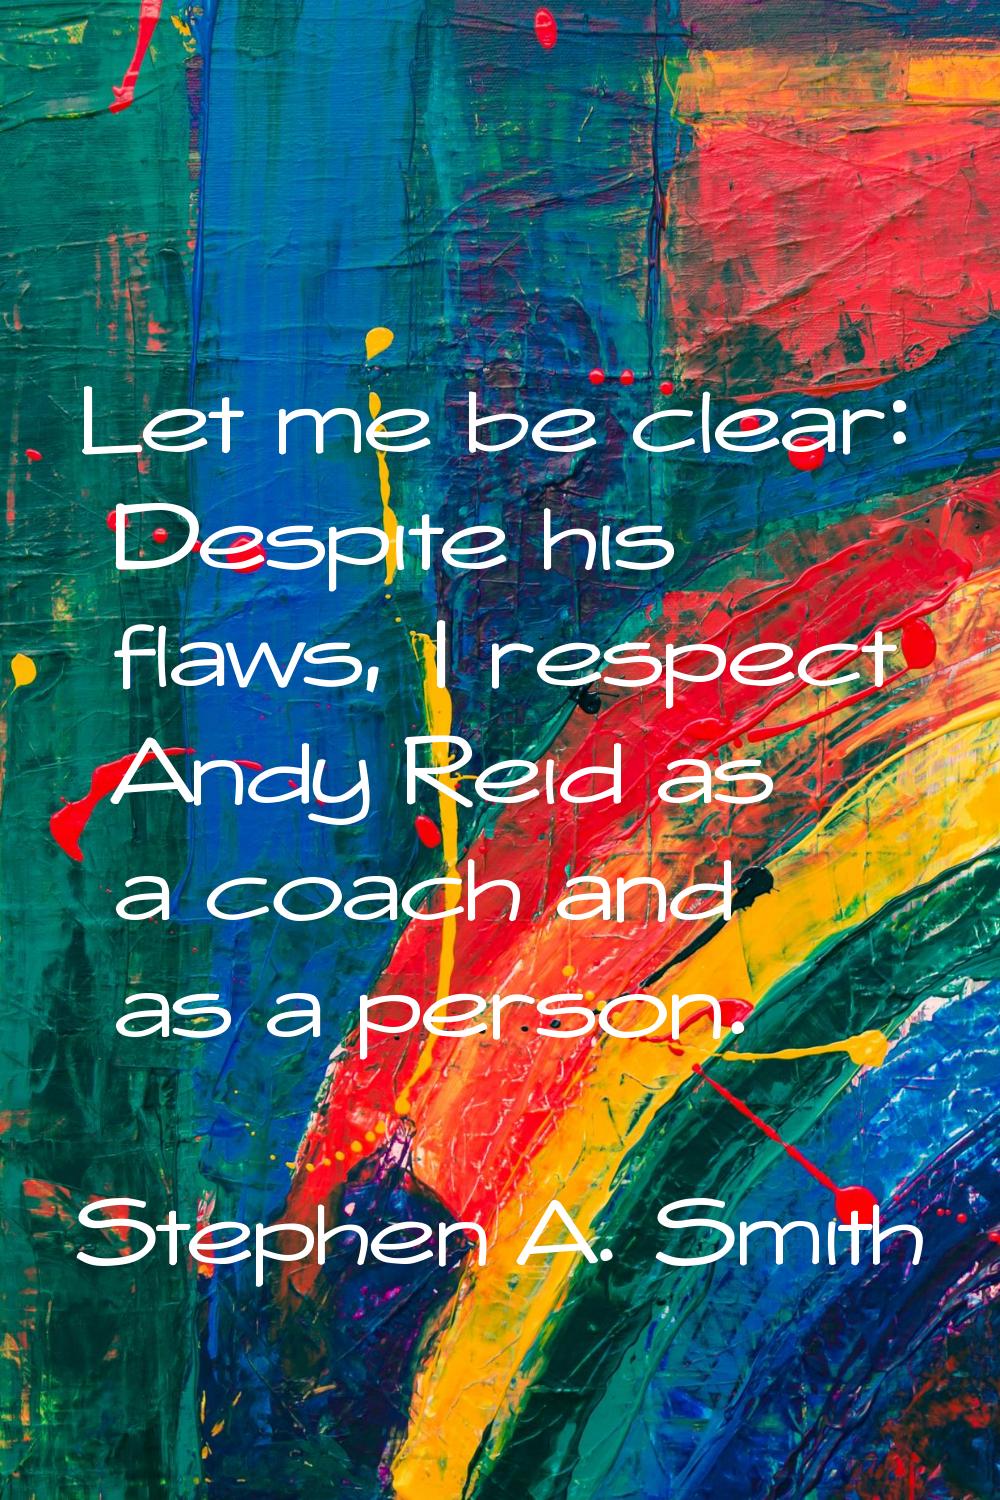 Let me be clear: Despite his flaws, I respect Andy Reid as a coach and as a person.